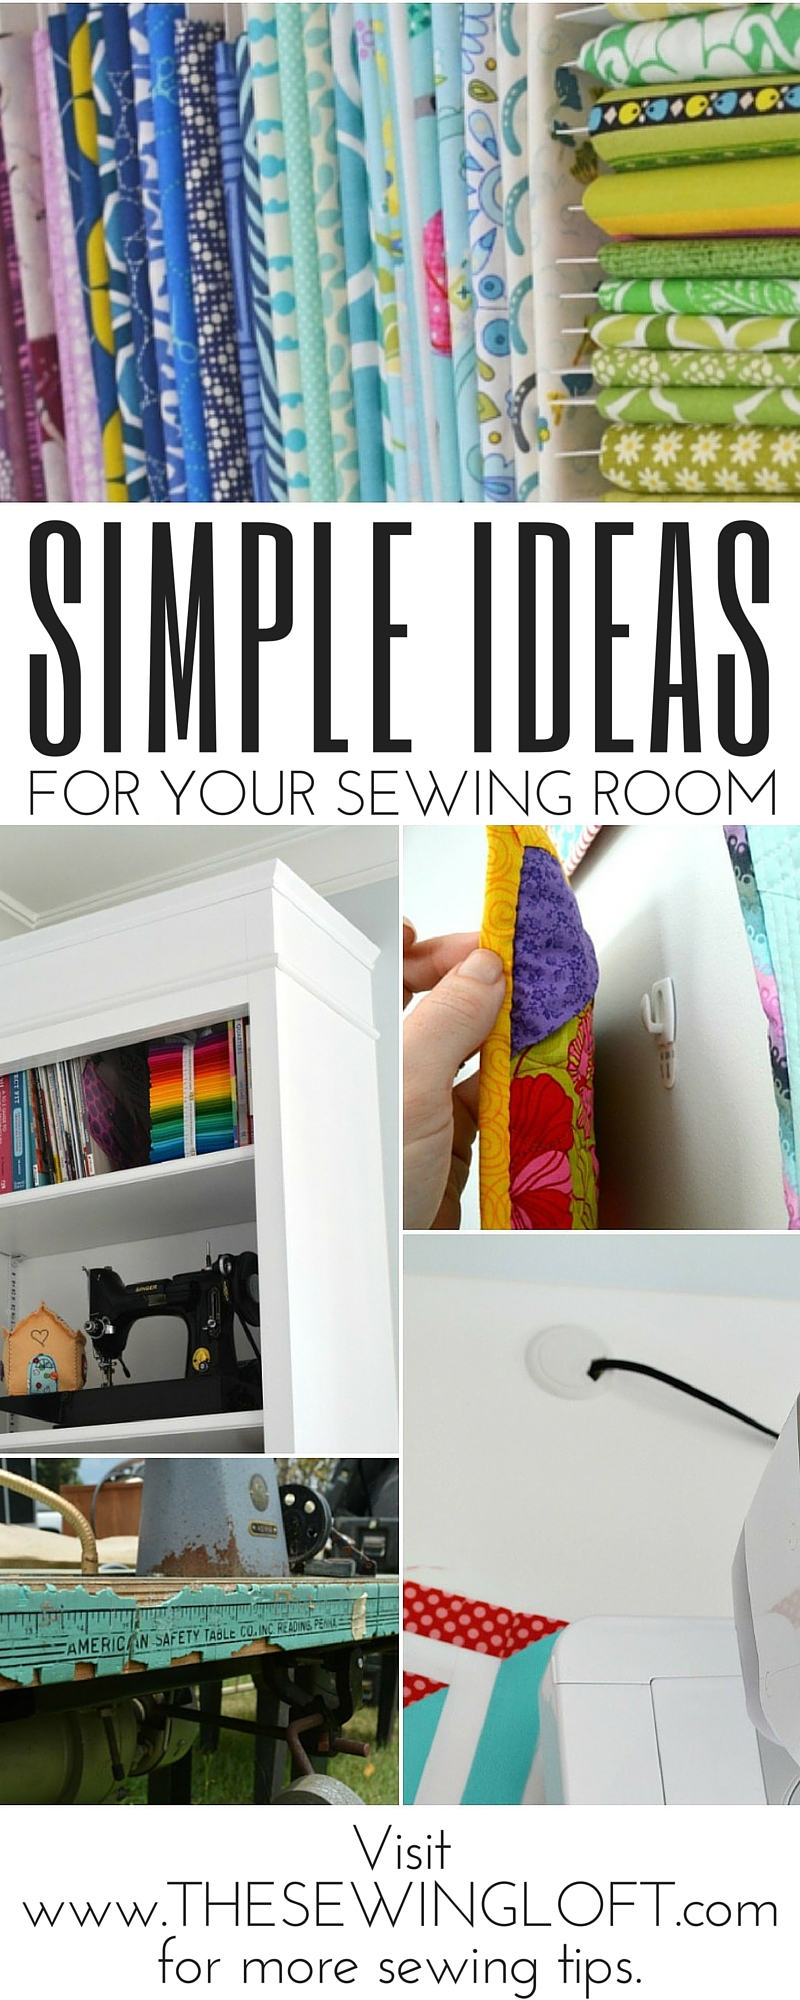 Keep your sewing room organized and pretty with these simple tips from The Sewing Loft.